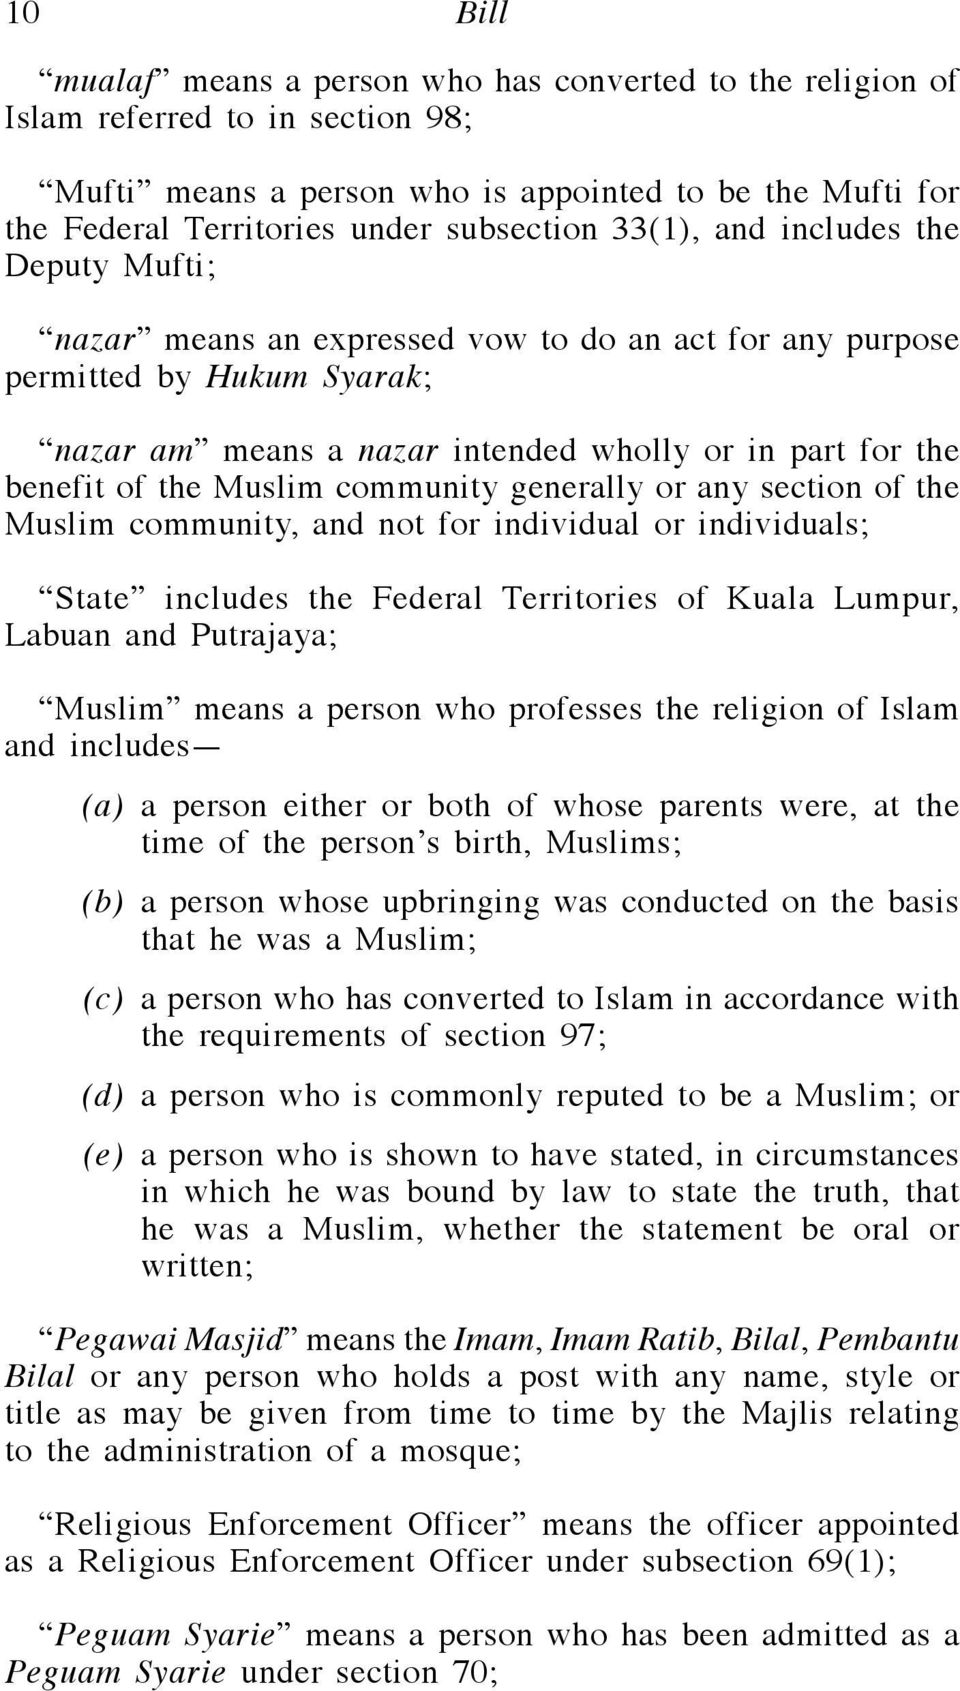 Muslim community generally or any section of the Muslim community, and not for individual or individuals; State includes the Federal Territories of Kuala Lumpur, Labuan and Putrajaya; Muslim means a